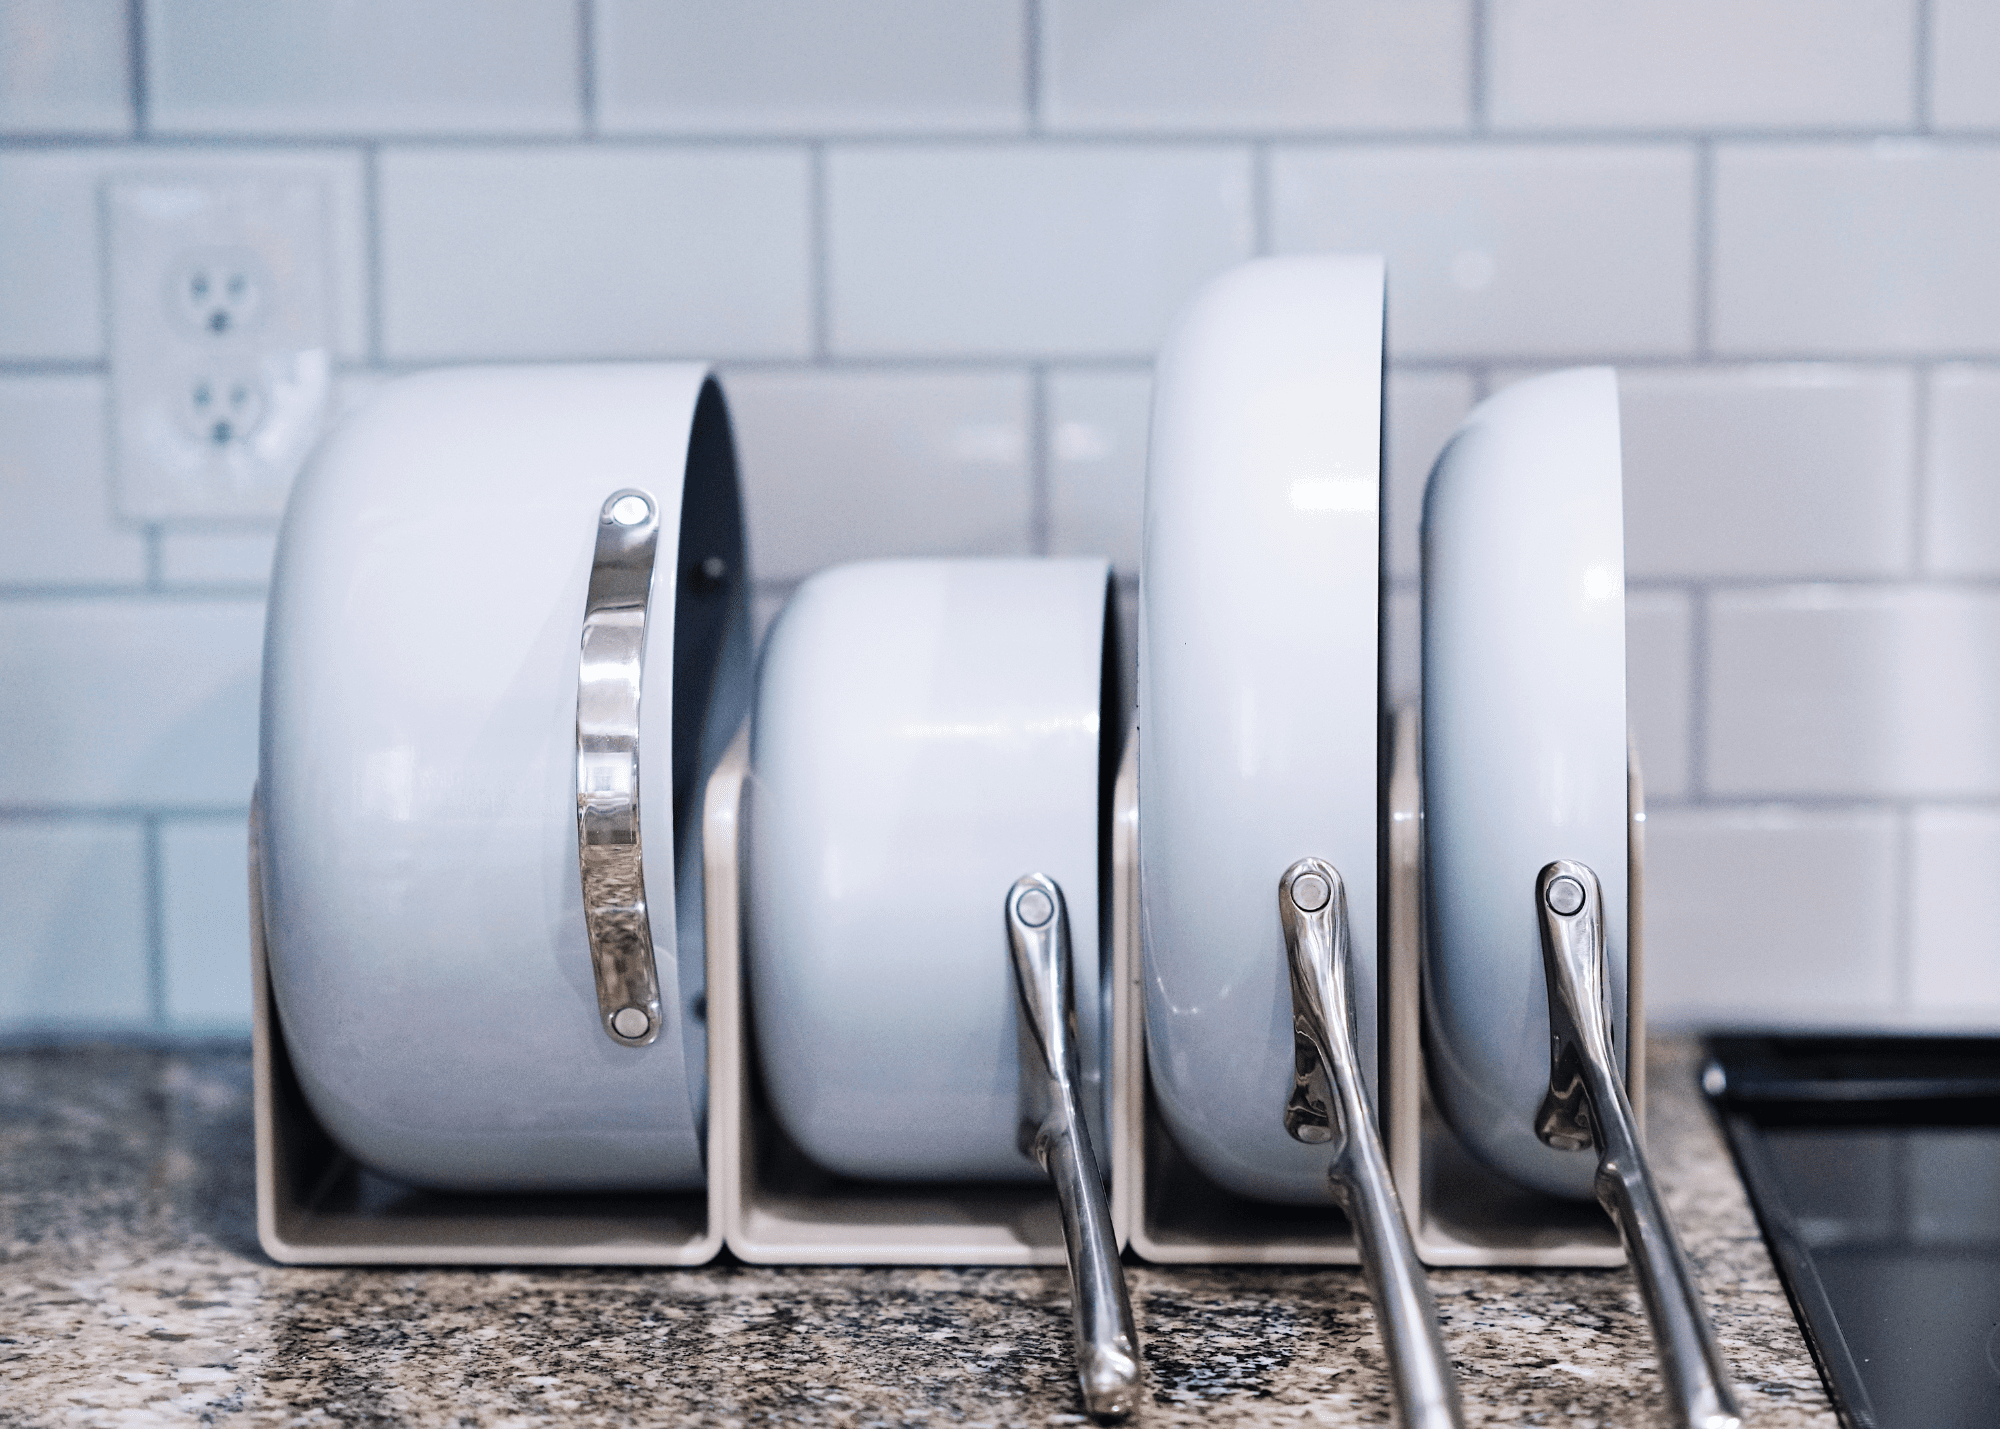 Caraway: A New Modern Cookware Set You Won't Want to Stow Away